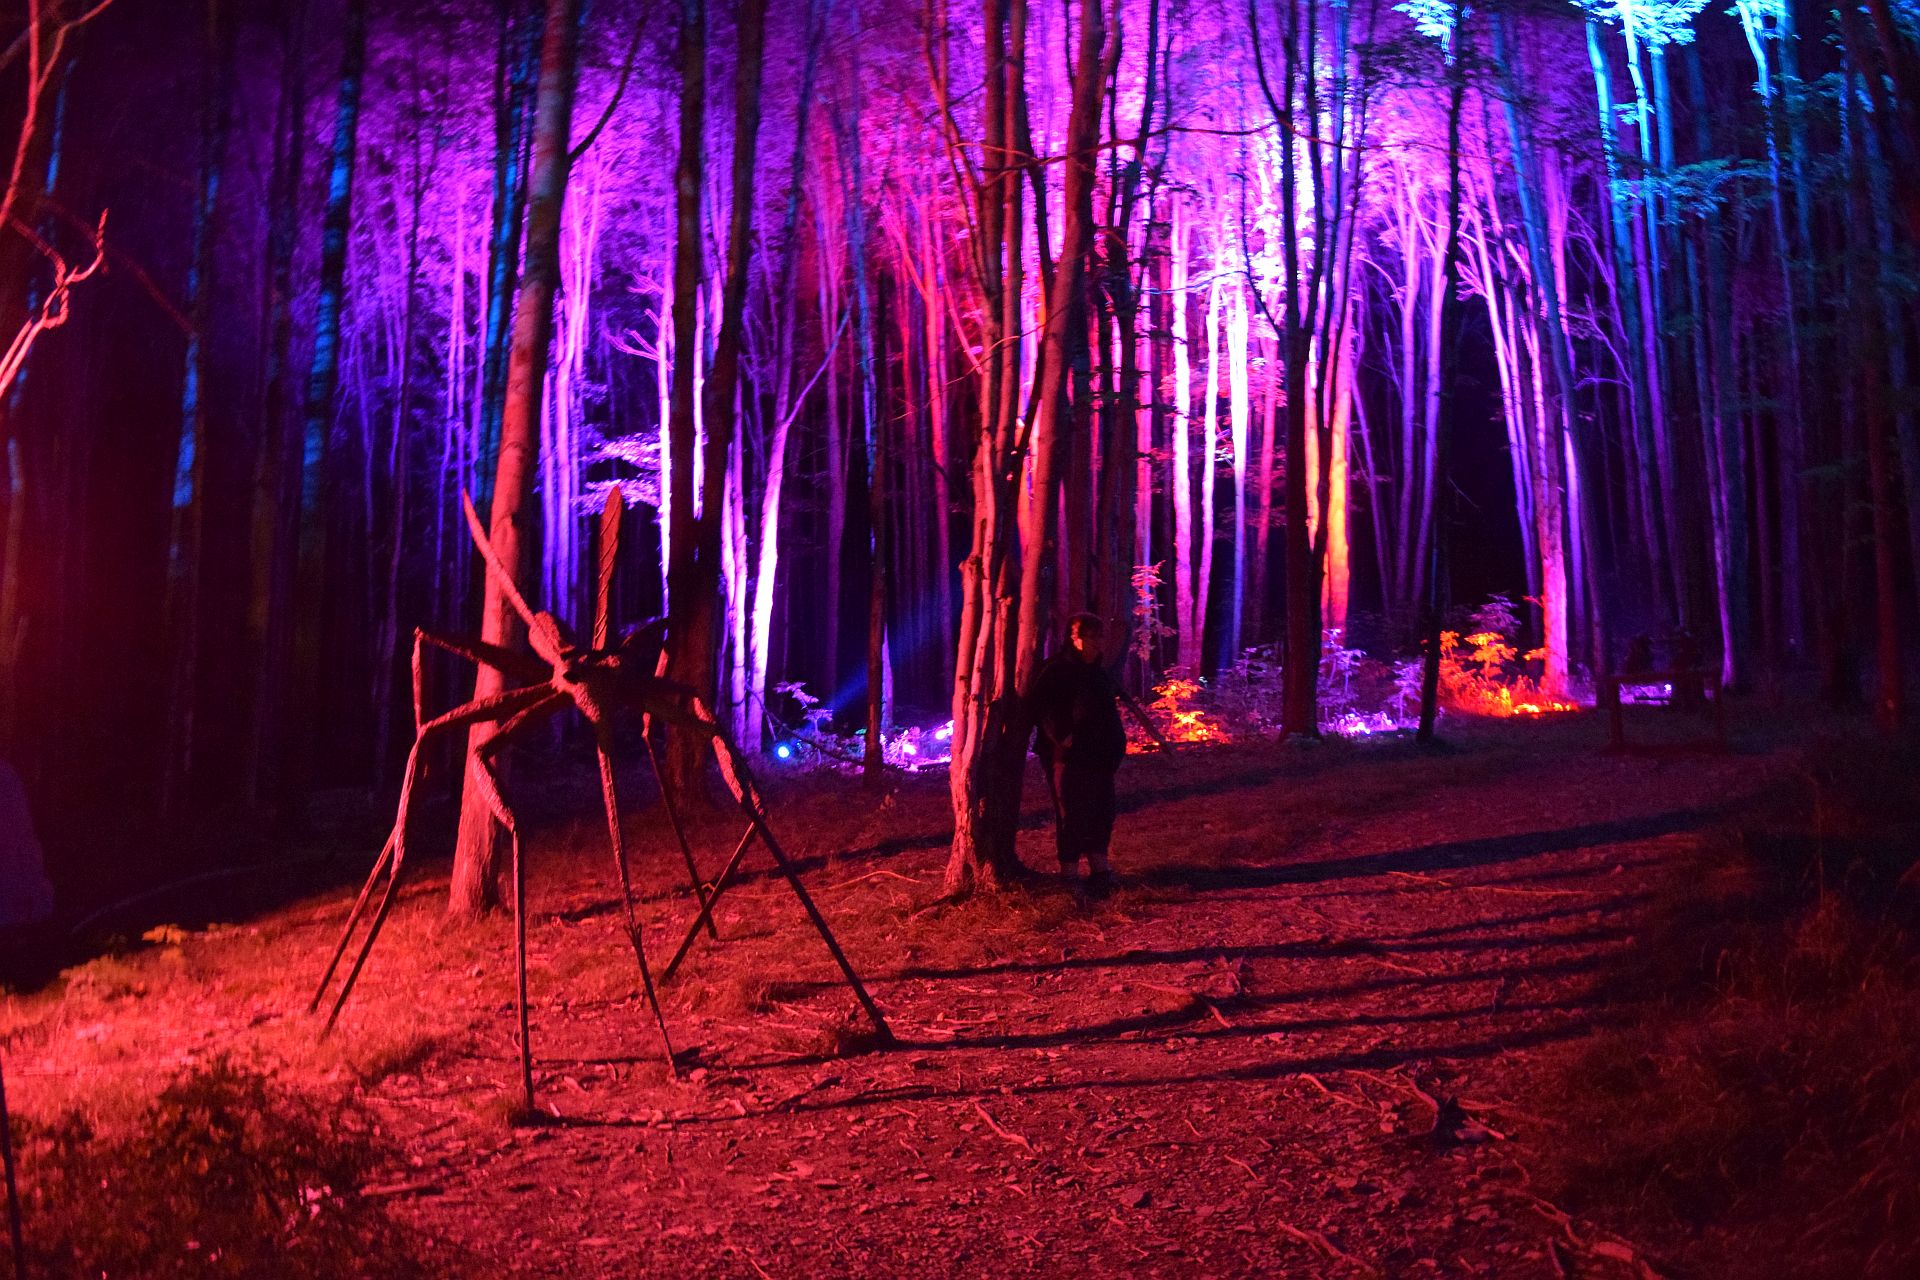 Press Release: NIGHT LIGHTS returns to Griffis Sculpture Park for fifth year